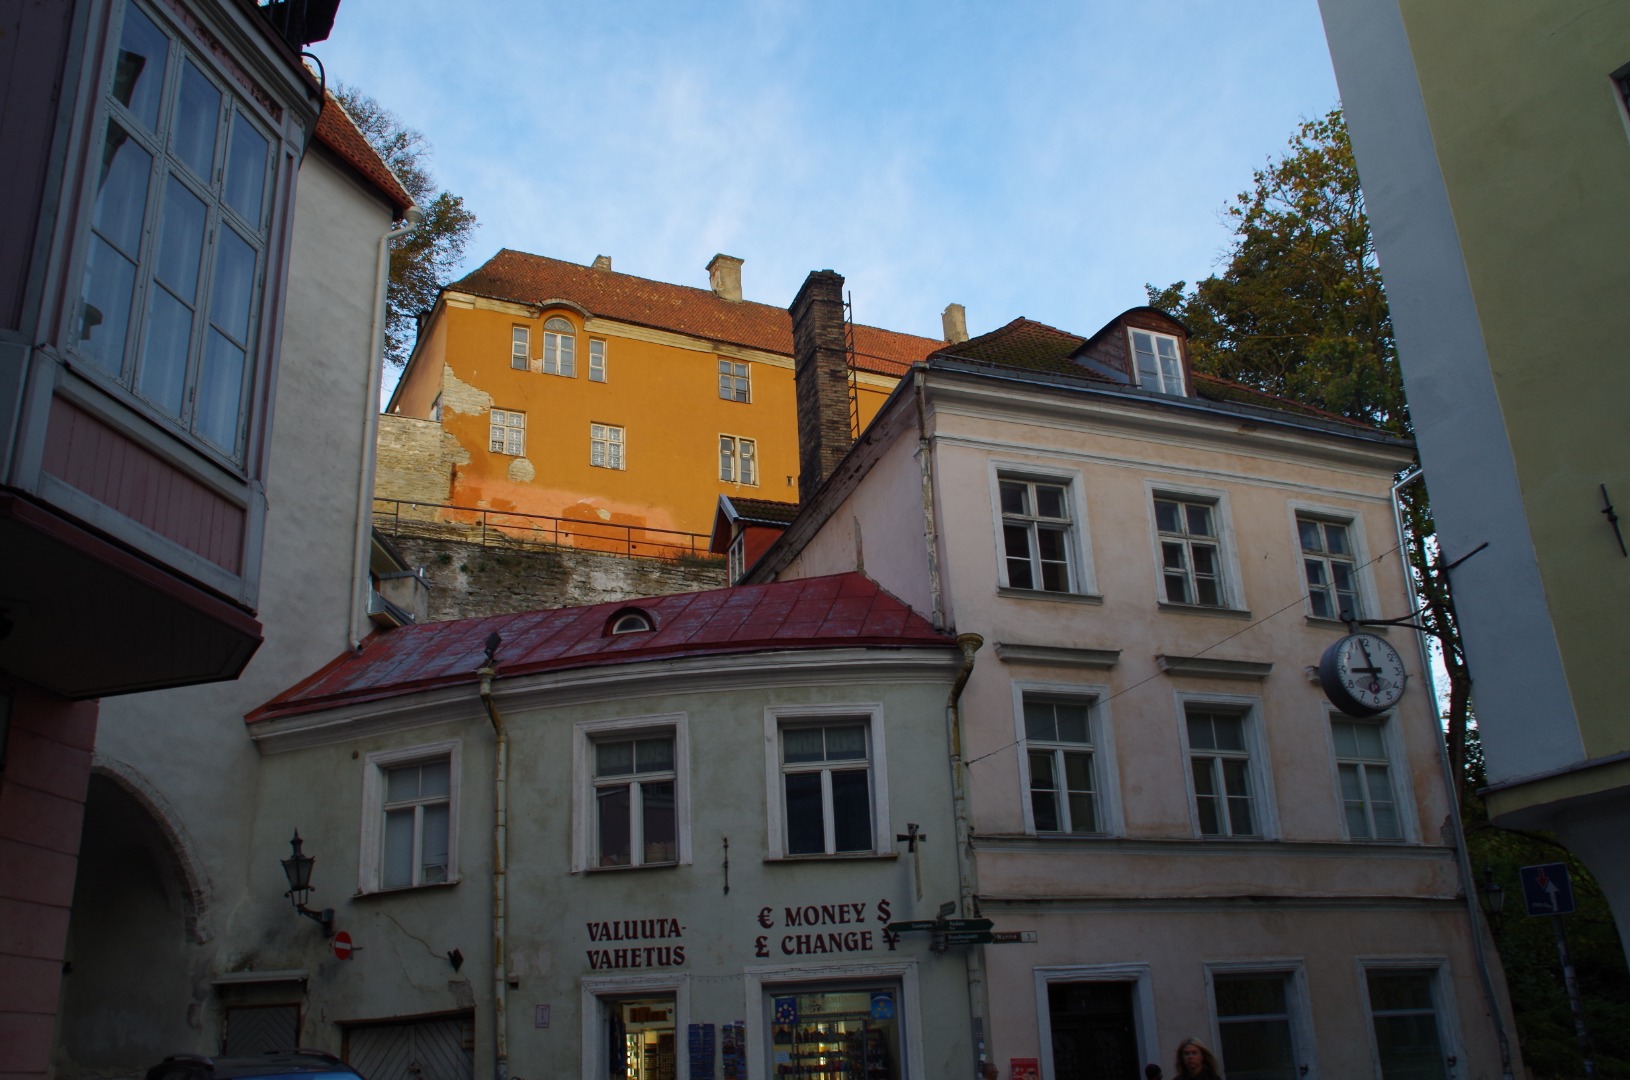 Buildings in the Old Town of Tallinn rephoto